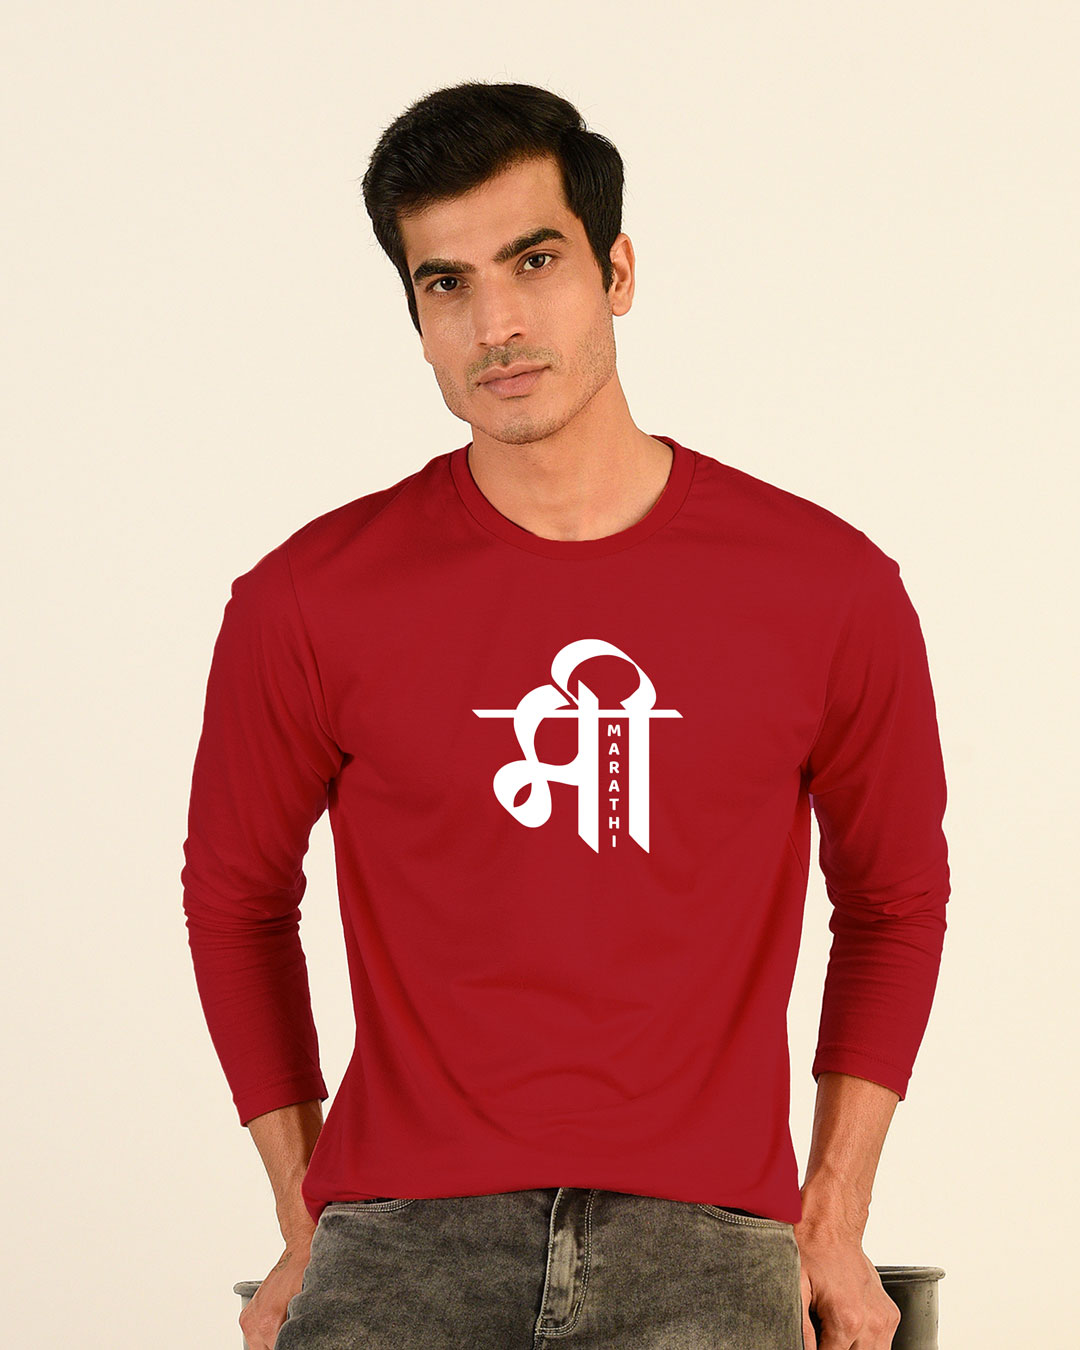 casual shirt meaning in marathi